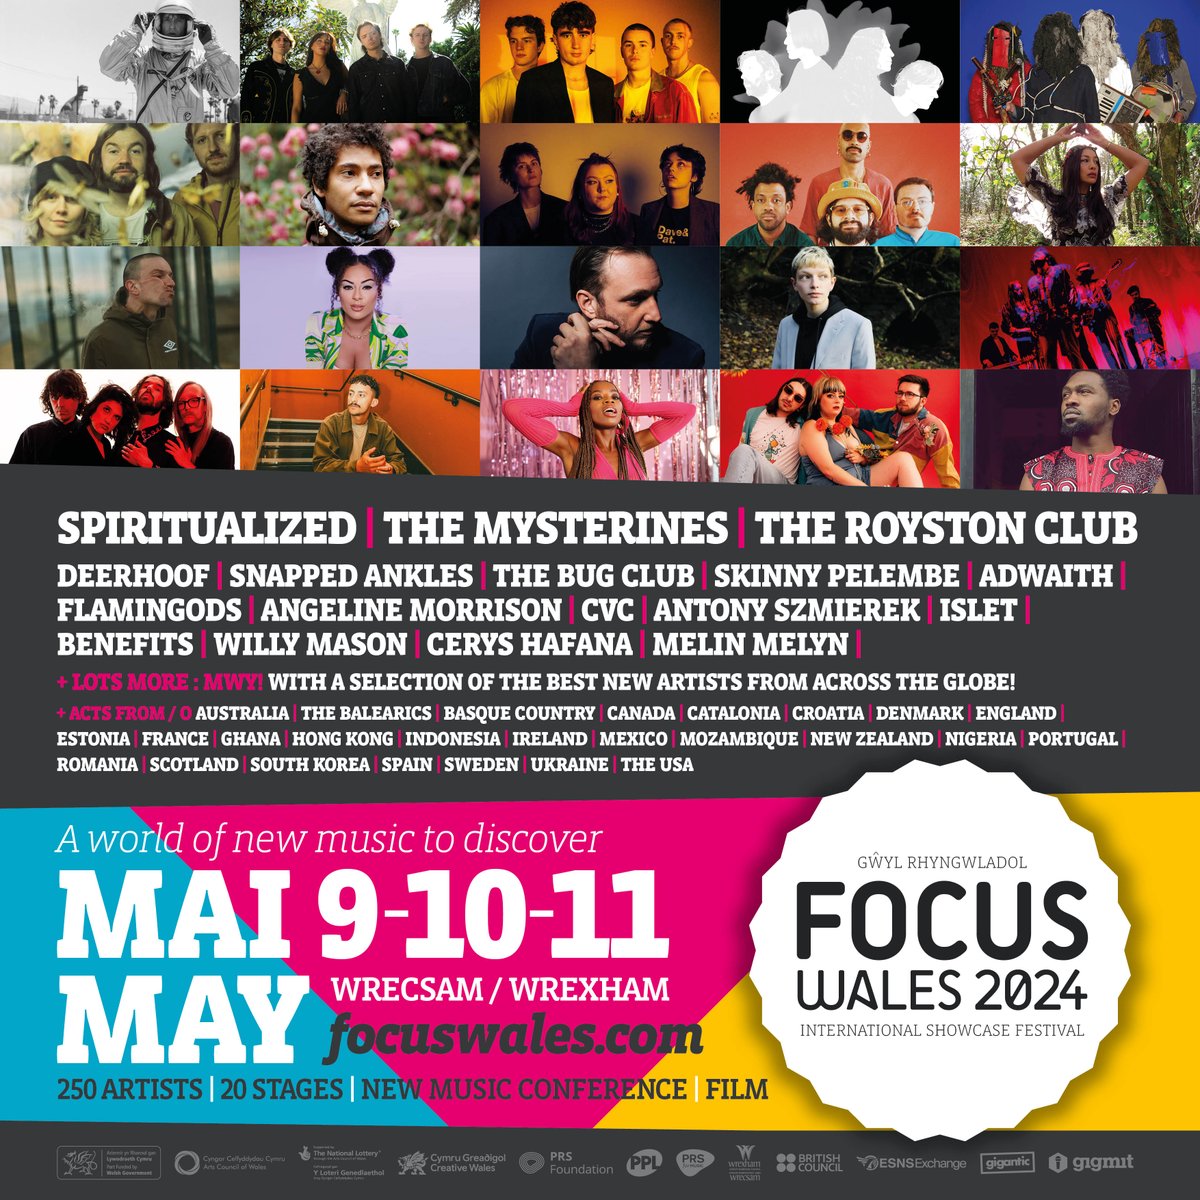 In less than a week's time we'll be welcoming over 20,000 people to #Wrexham for the 14th birthday edition of @FocusWales 🏴󠁧󠁢󠁷󠁬󠁳󠁿🙌 We're delighted to be at heart of the action once again, with 2 music stages, conferences, @BBCRadioWales broadcast & a few surprises! Get involved! ❤️